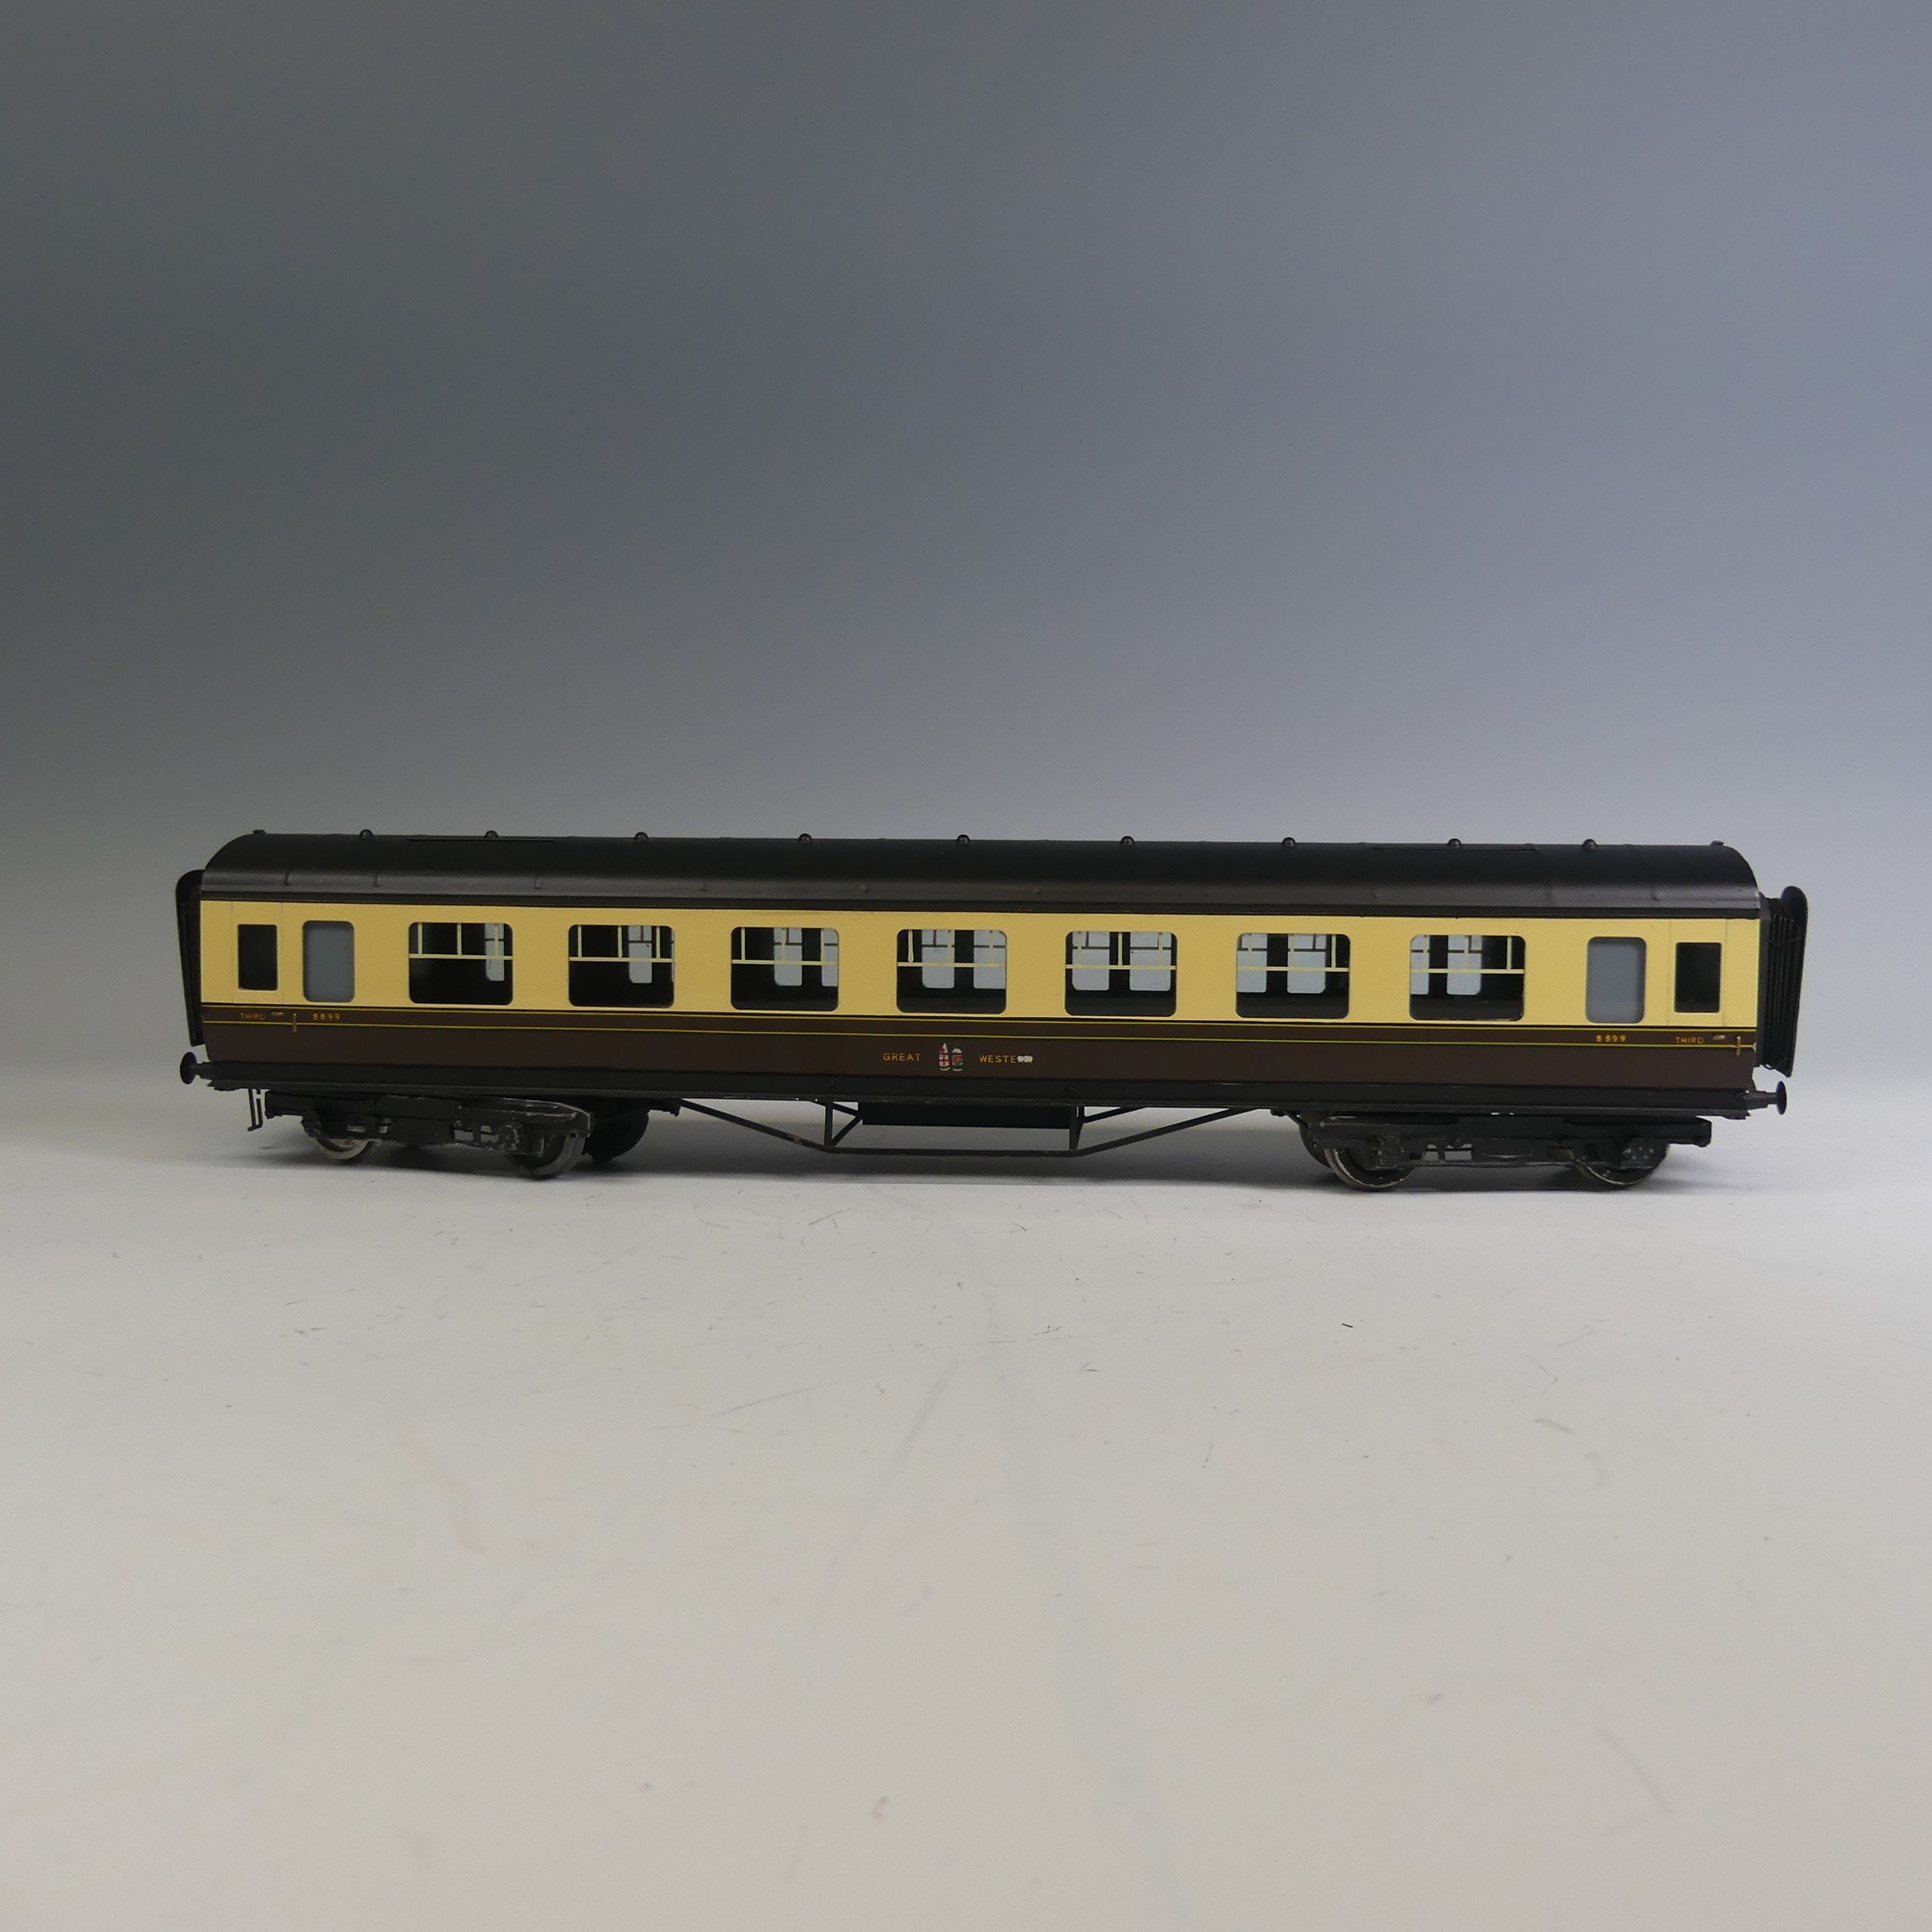 Exley ‘0’ gauge GWR All 3rd Corridor Passenger Coach, chocolate and cream, No.8899. - Image 2 of 6